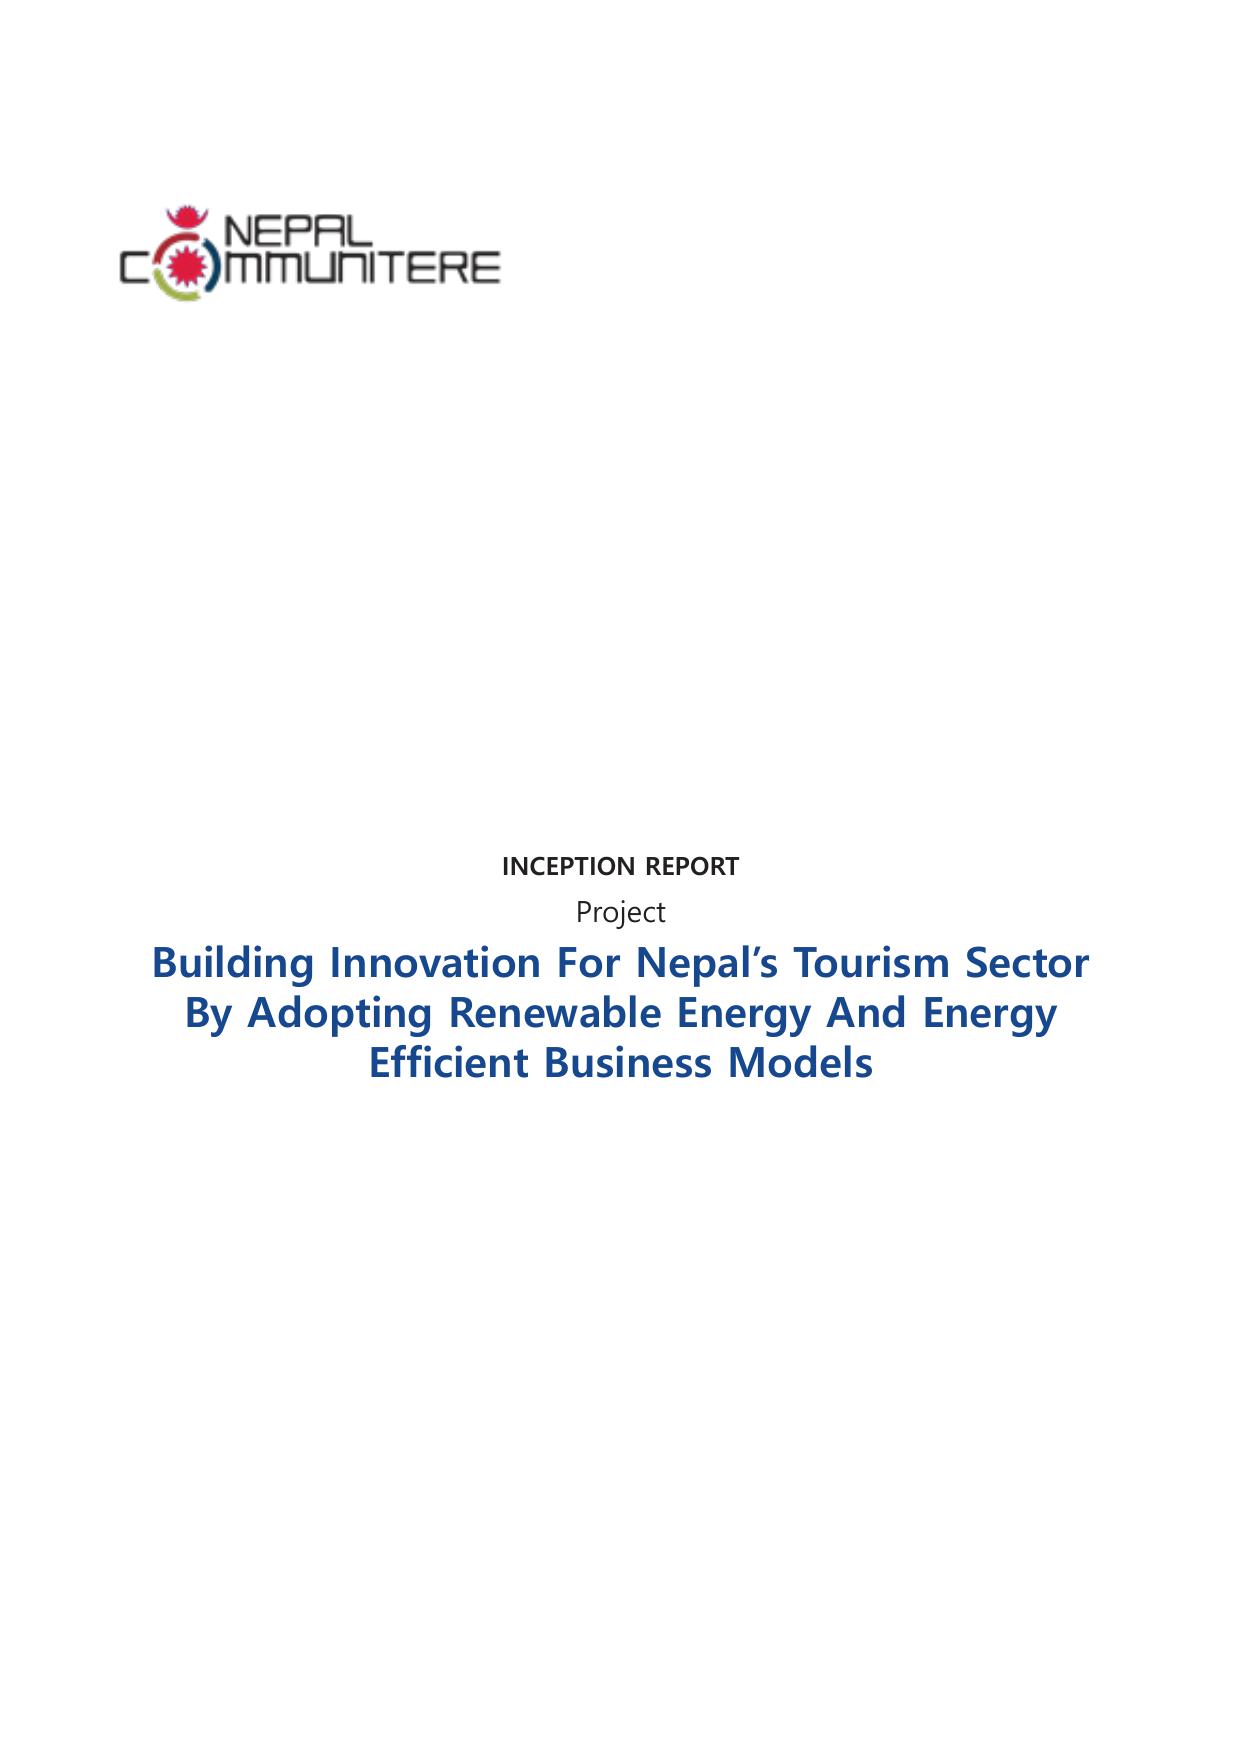 Building Innovation for Nepal’s Tourism Sector by adopting renewable energy and energy efficient business models project inception report